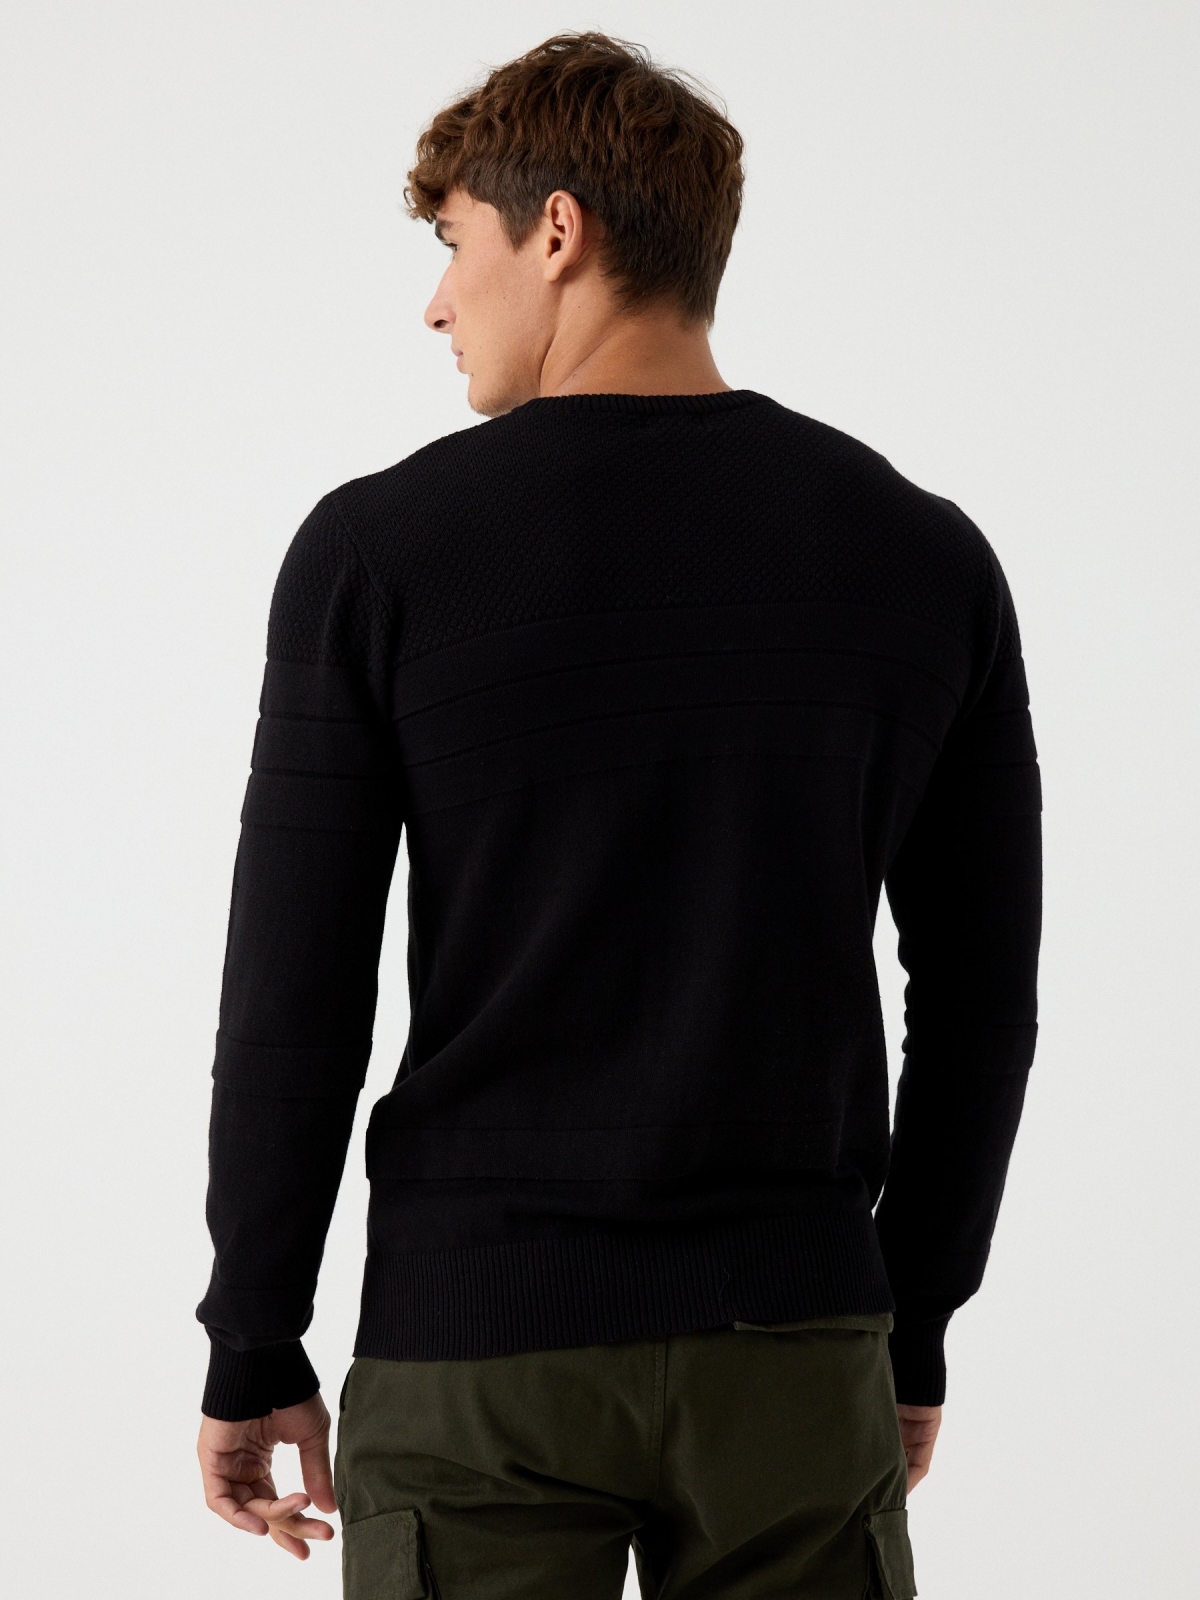 Basic striped texture sweater black middle back view